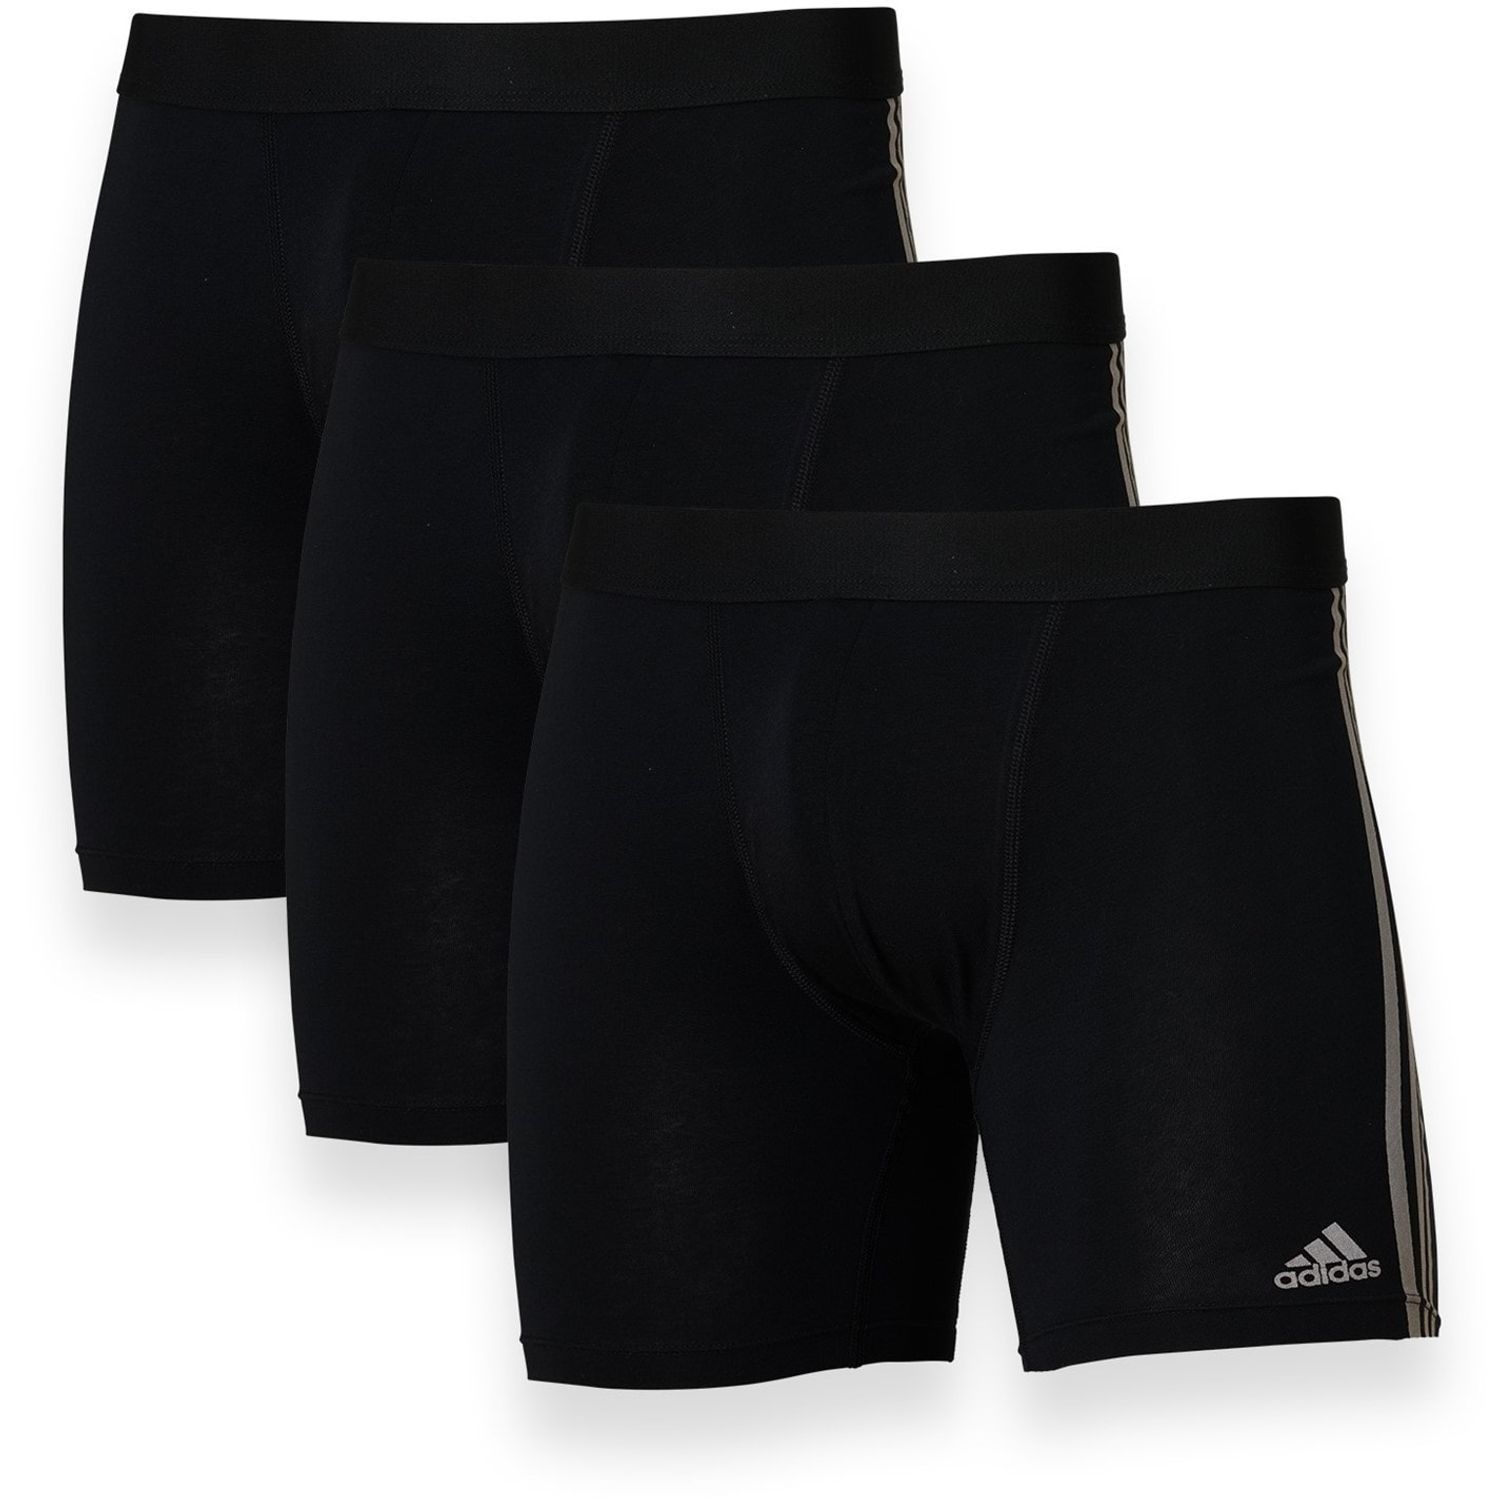 Black adidas Boxer Brief 3 Pack - Get The Label